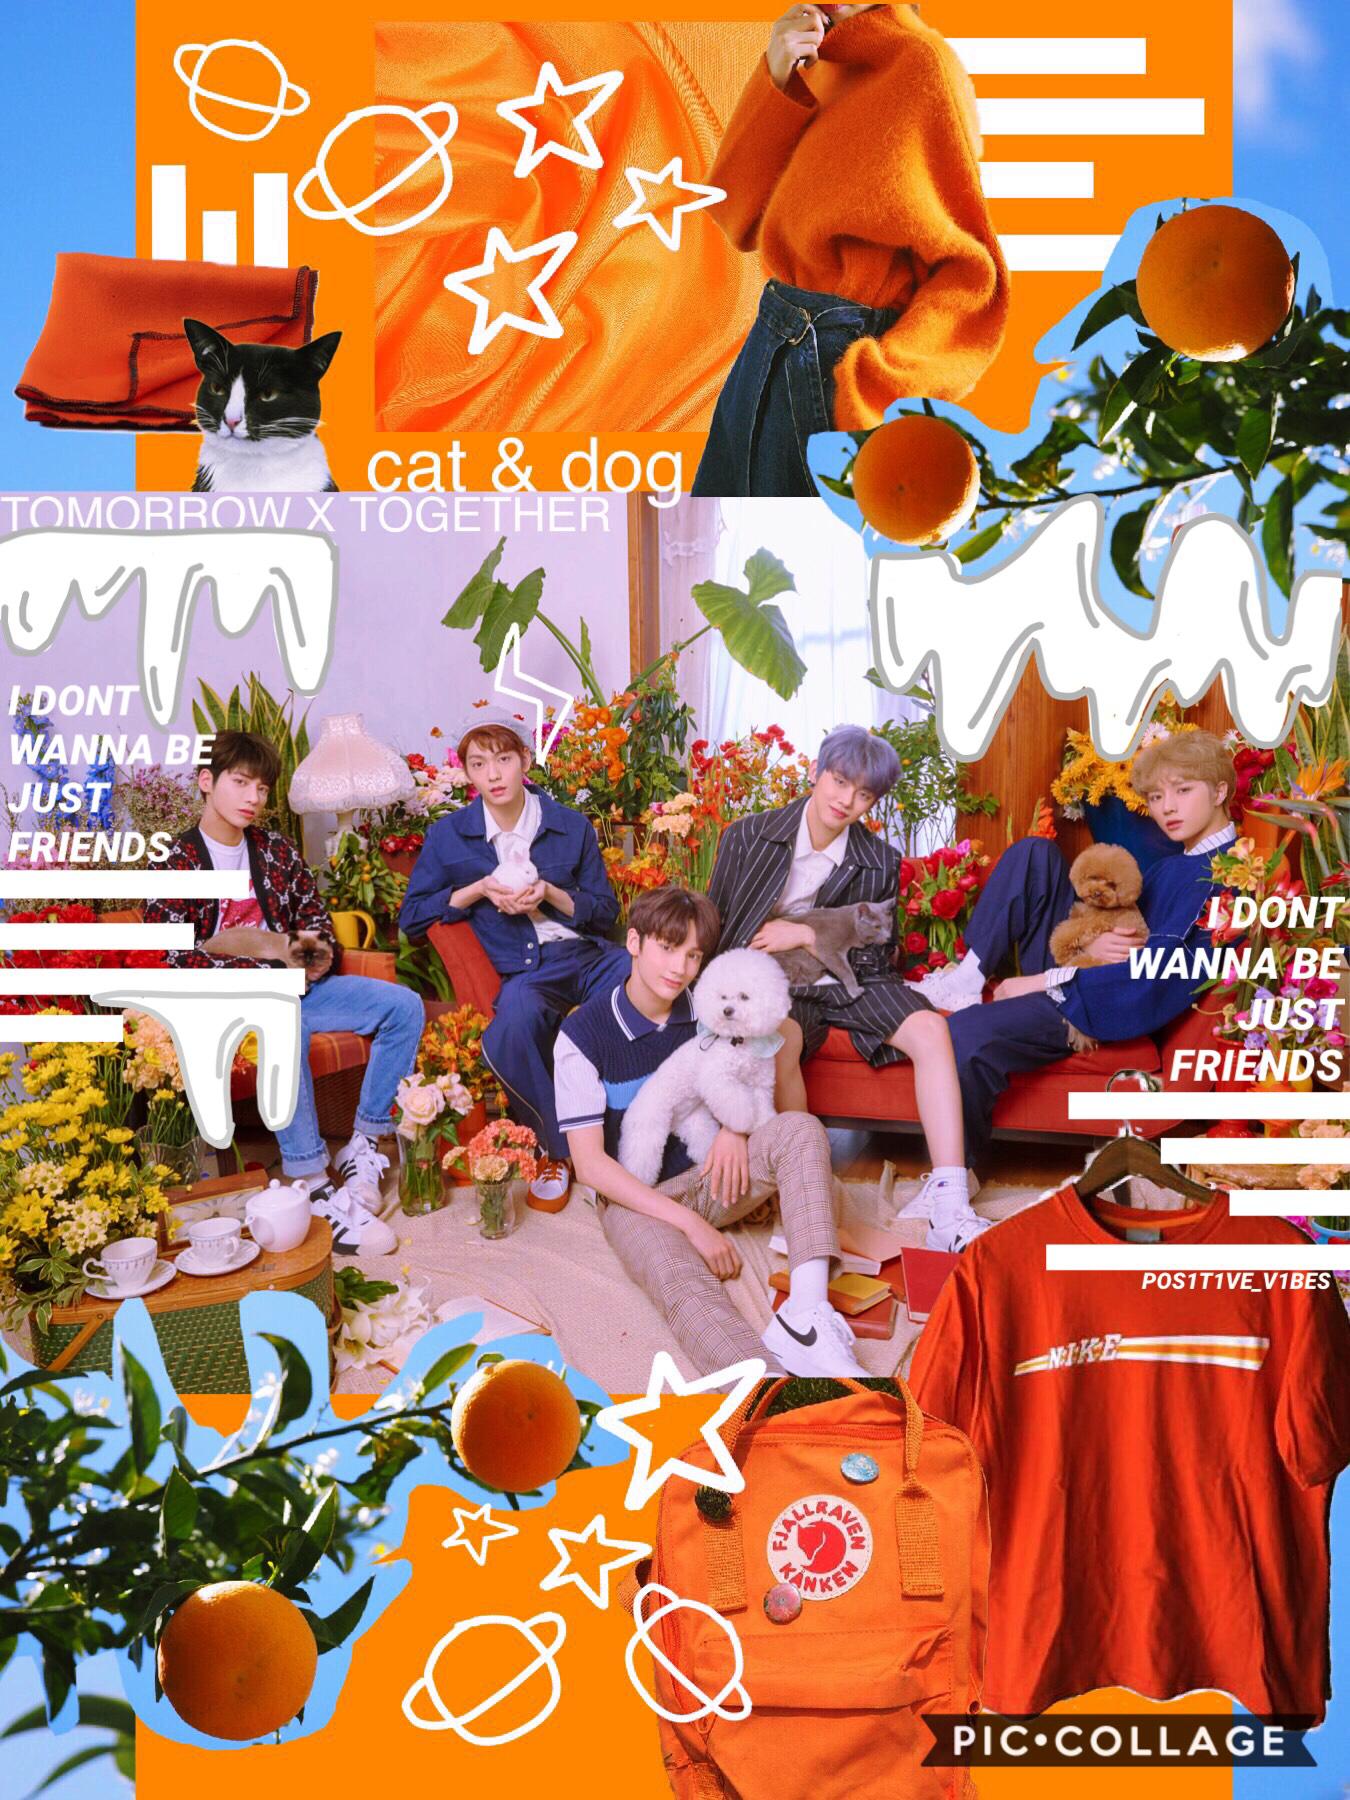 🍊inspired by @trashylove ~ go check their acc out!! their acc is droP DEAD GORGEOUS🍊Heading to Philadelphia this week🍊a edit for txt’s song “cat & dog” which recently came out & i’M iN lovE🍊BTS & Halsey did amazing at the BBMAS!!🍊
#PCONLY
#PHILADELPHIA
#O